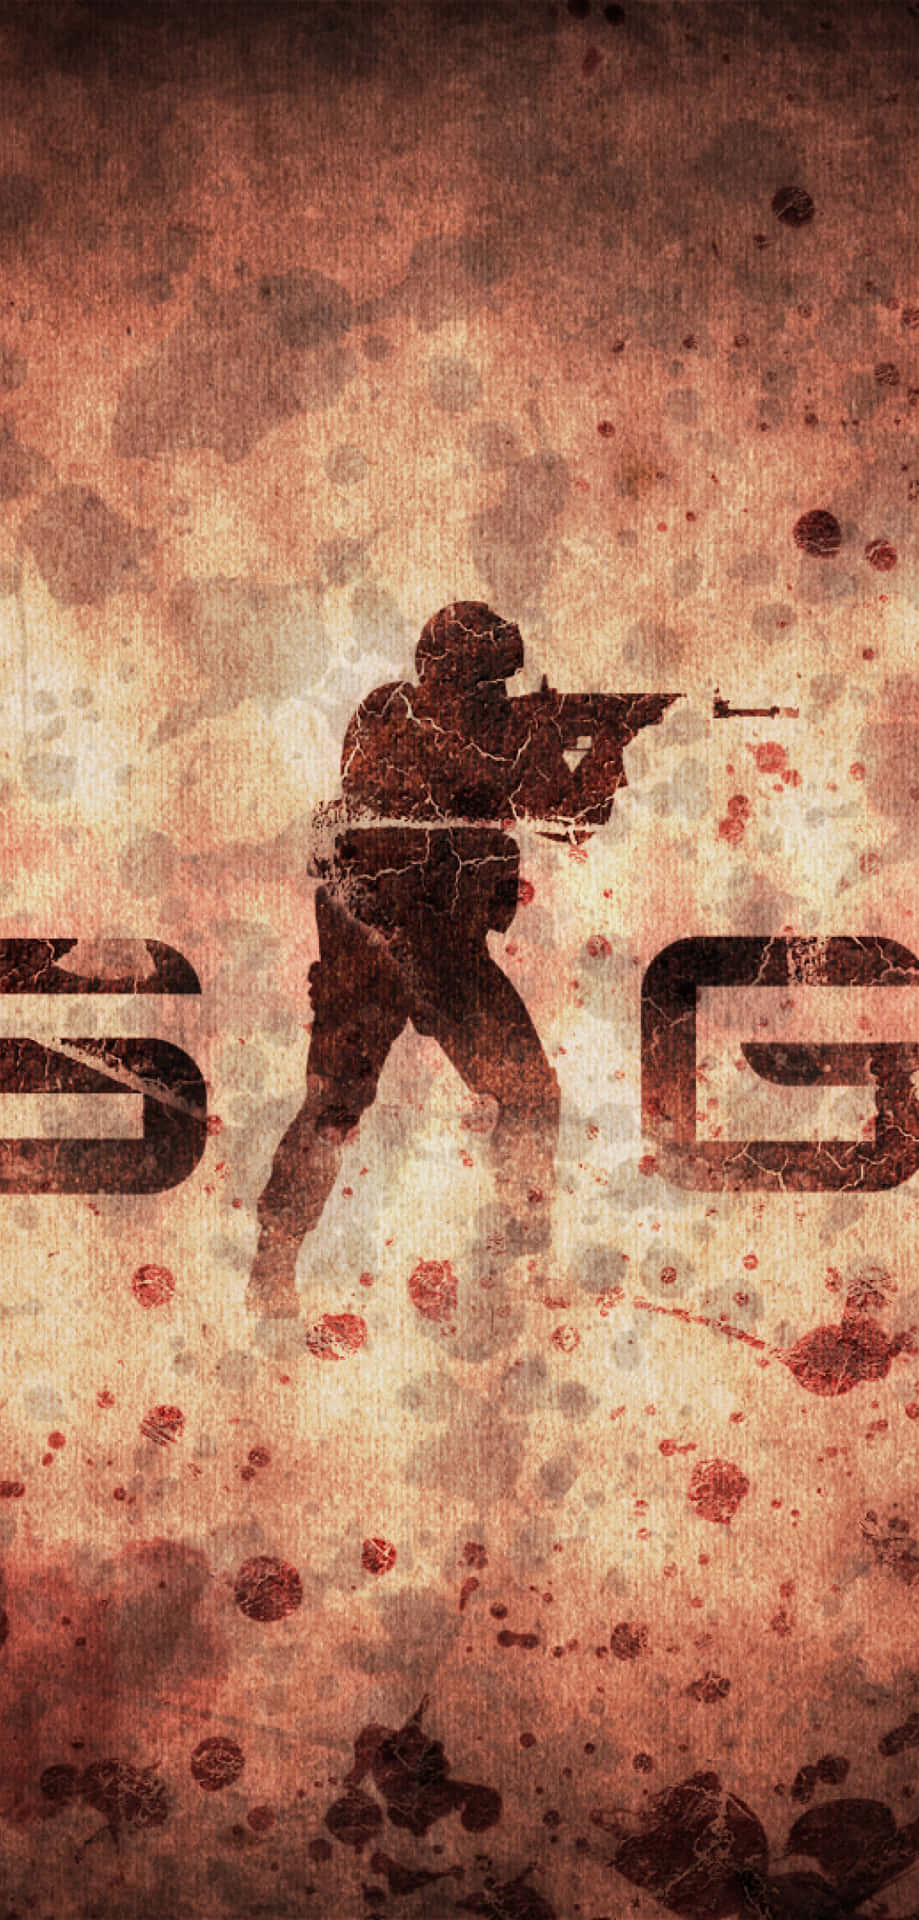 Pixel 3 Counter-strike Global Offensive Background 1080 X 2256 Background